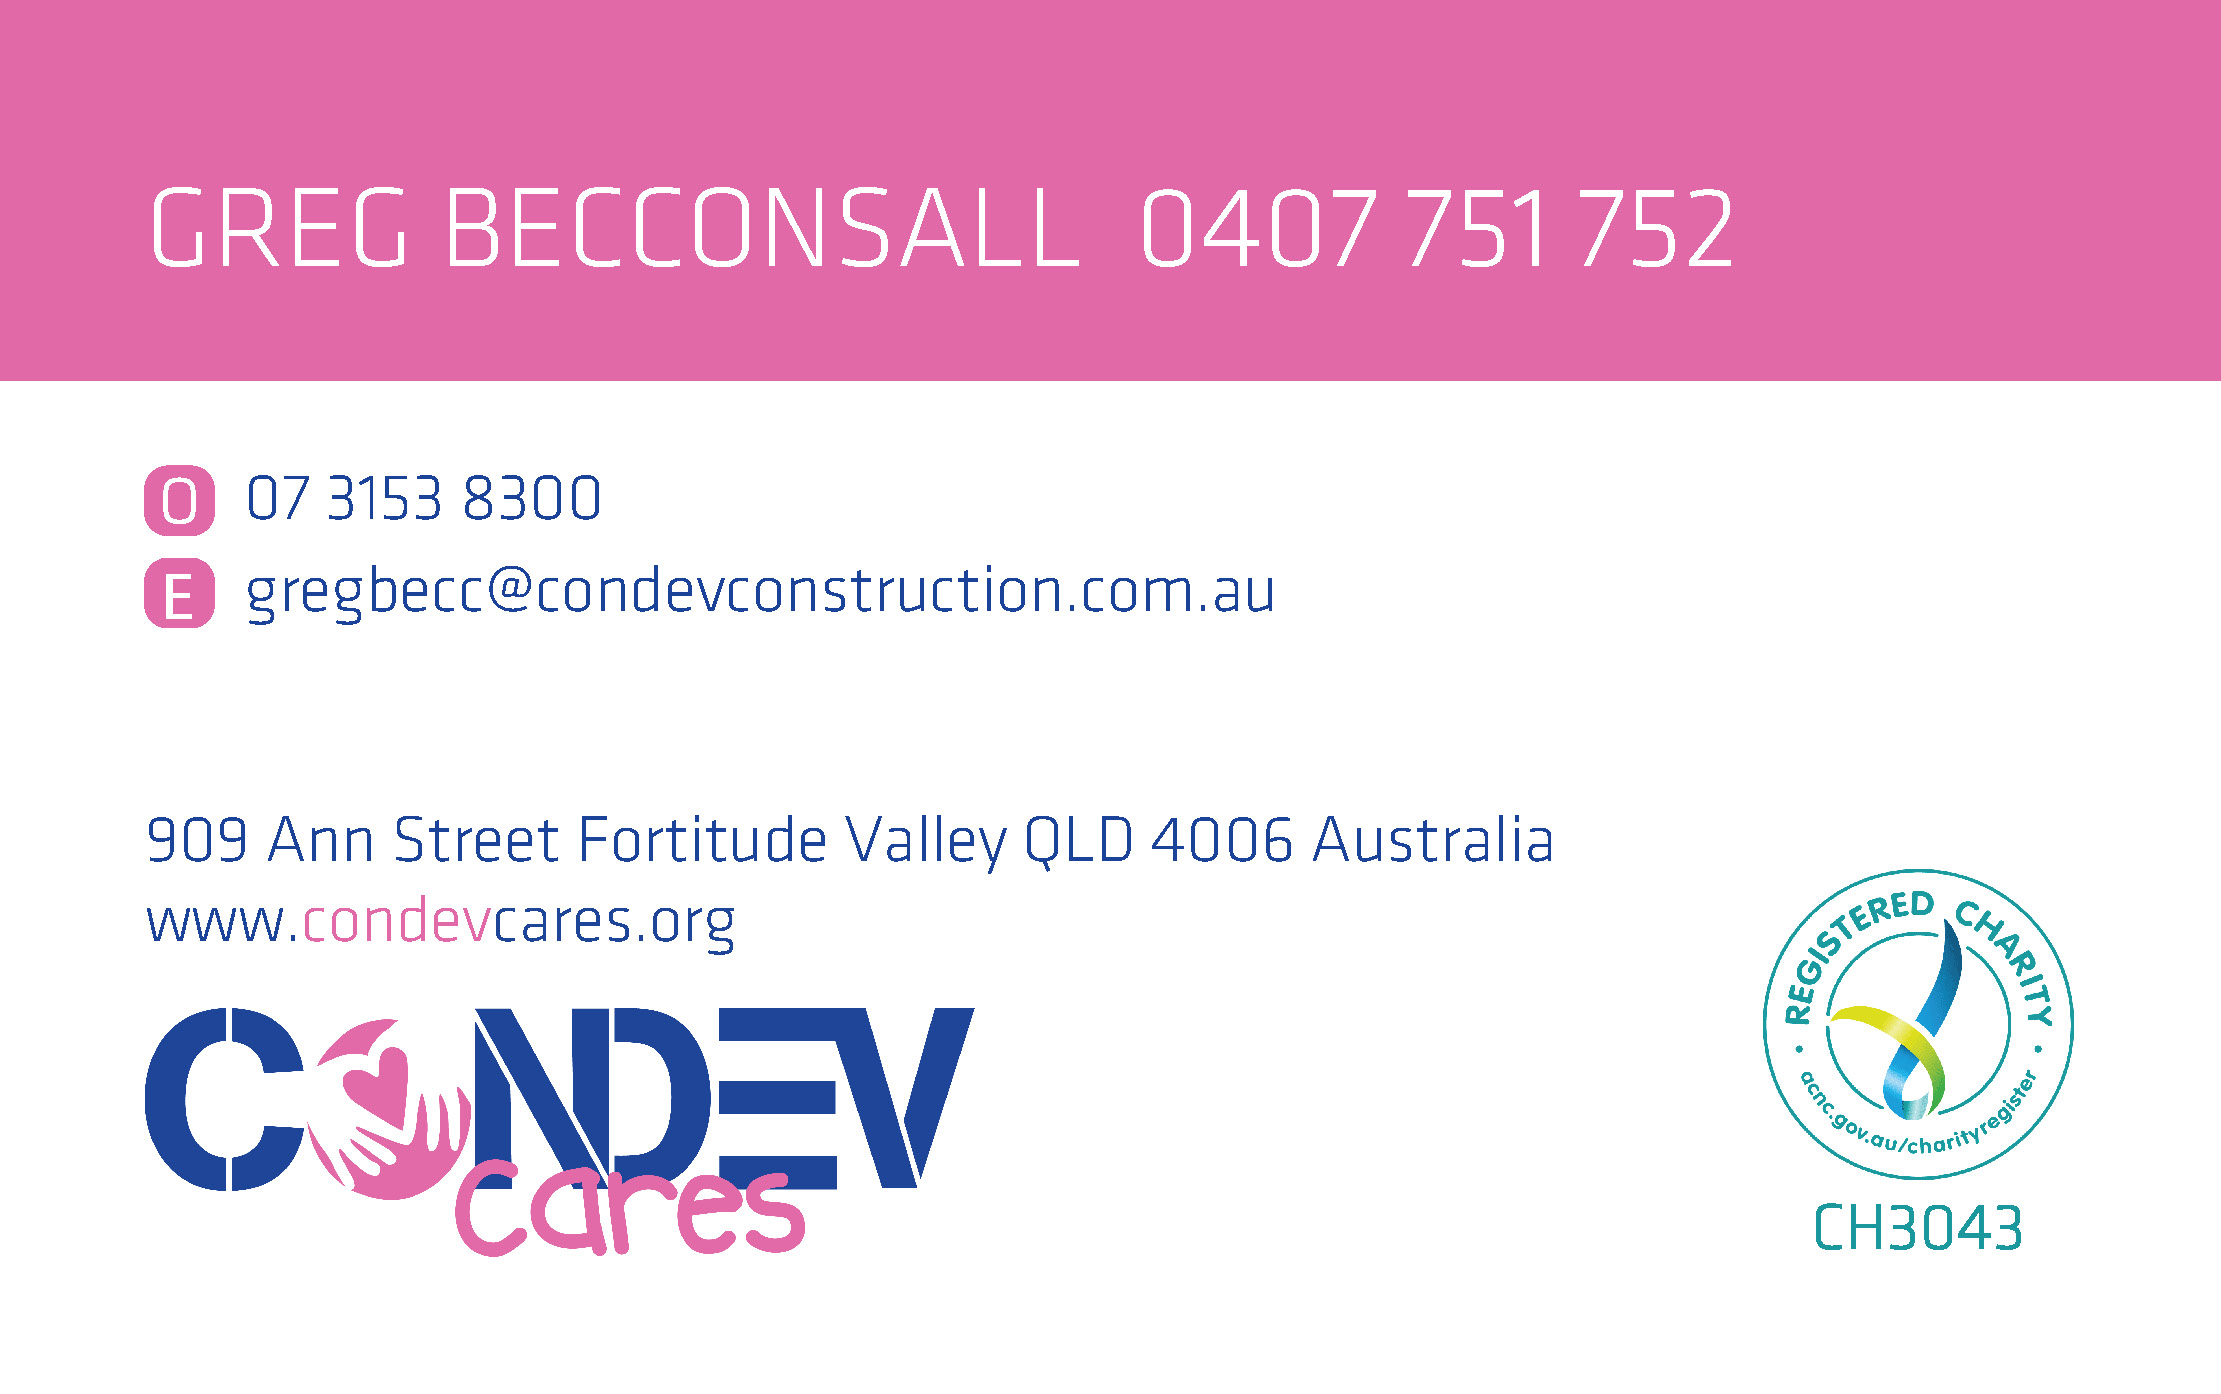 Condev Cares - Brisbane - Without Direct Number